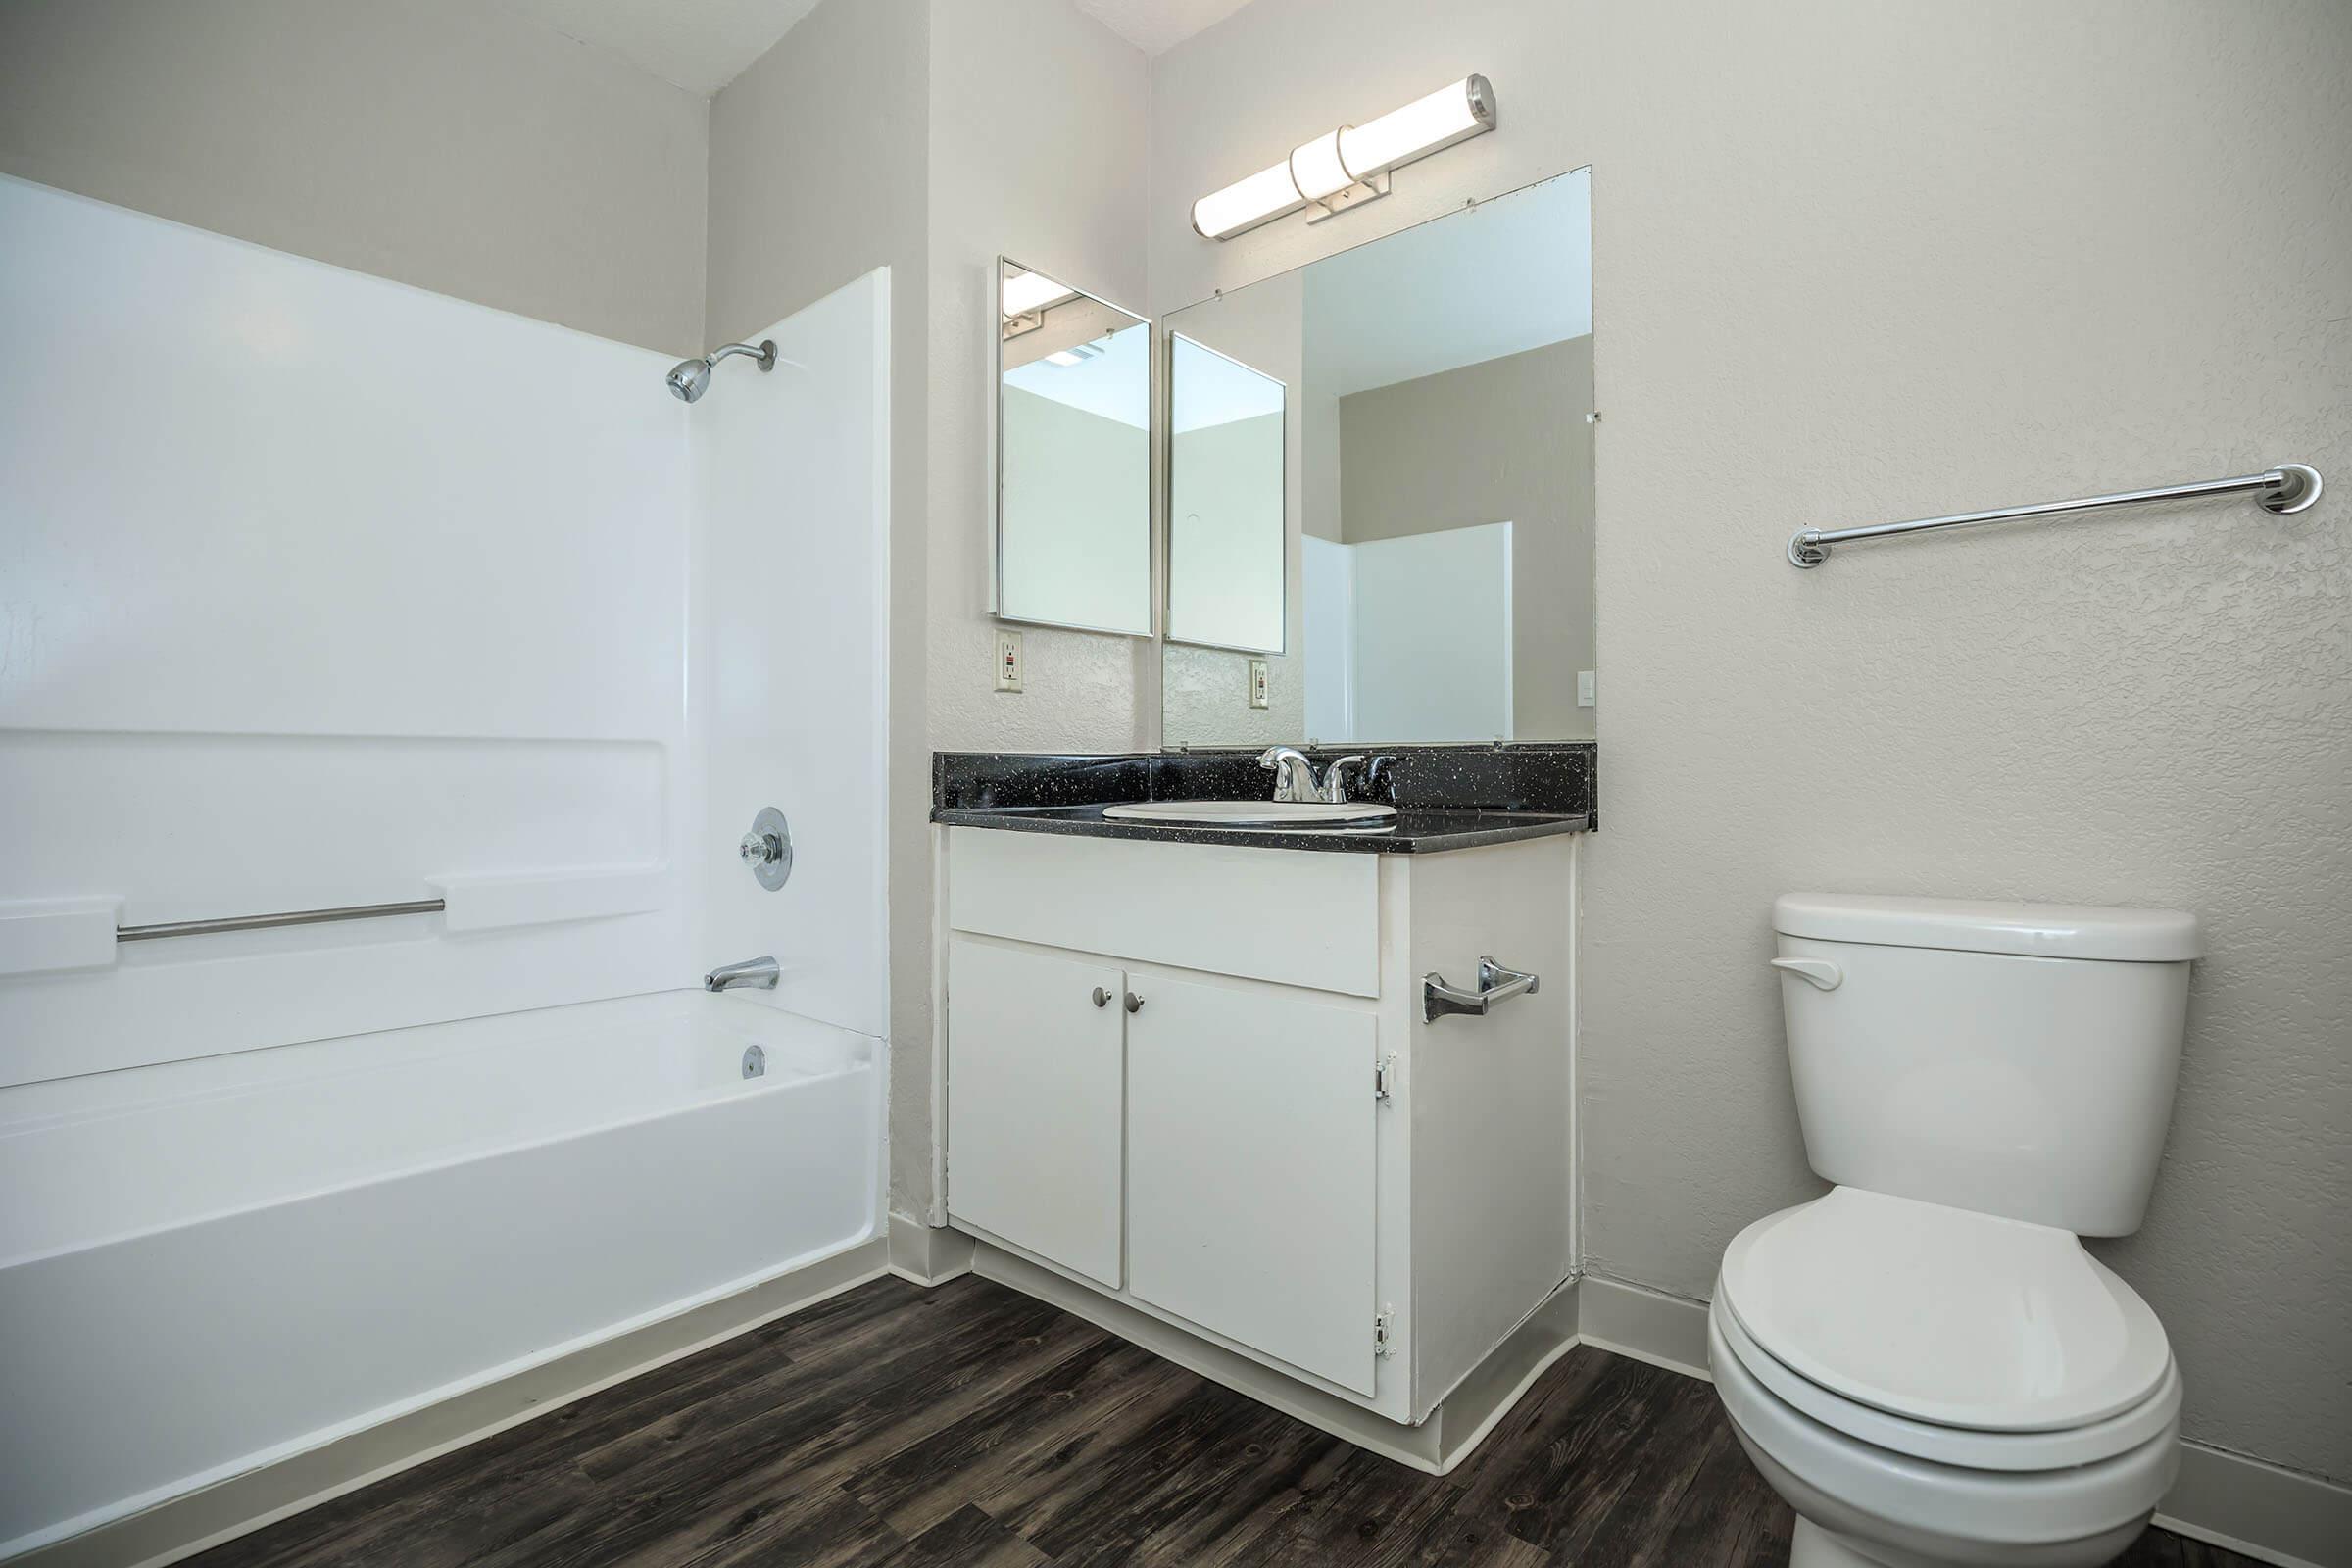 Bathroom with wooden floors and white cabinets